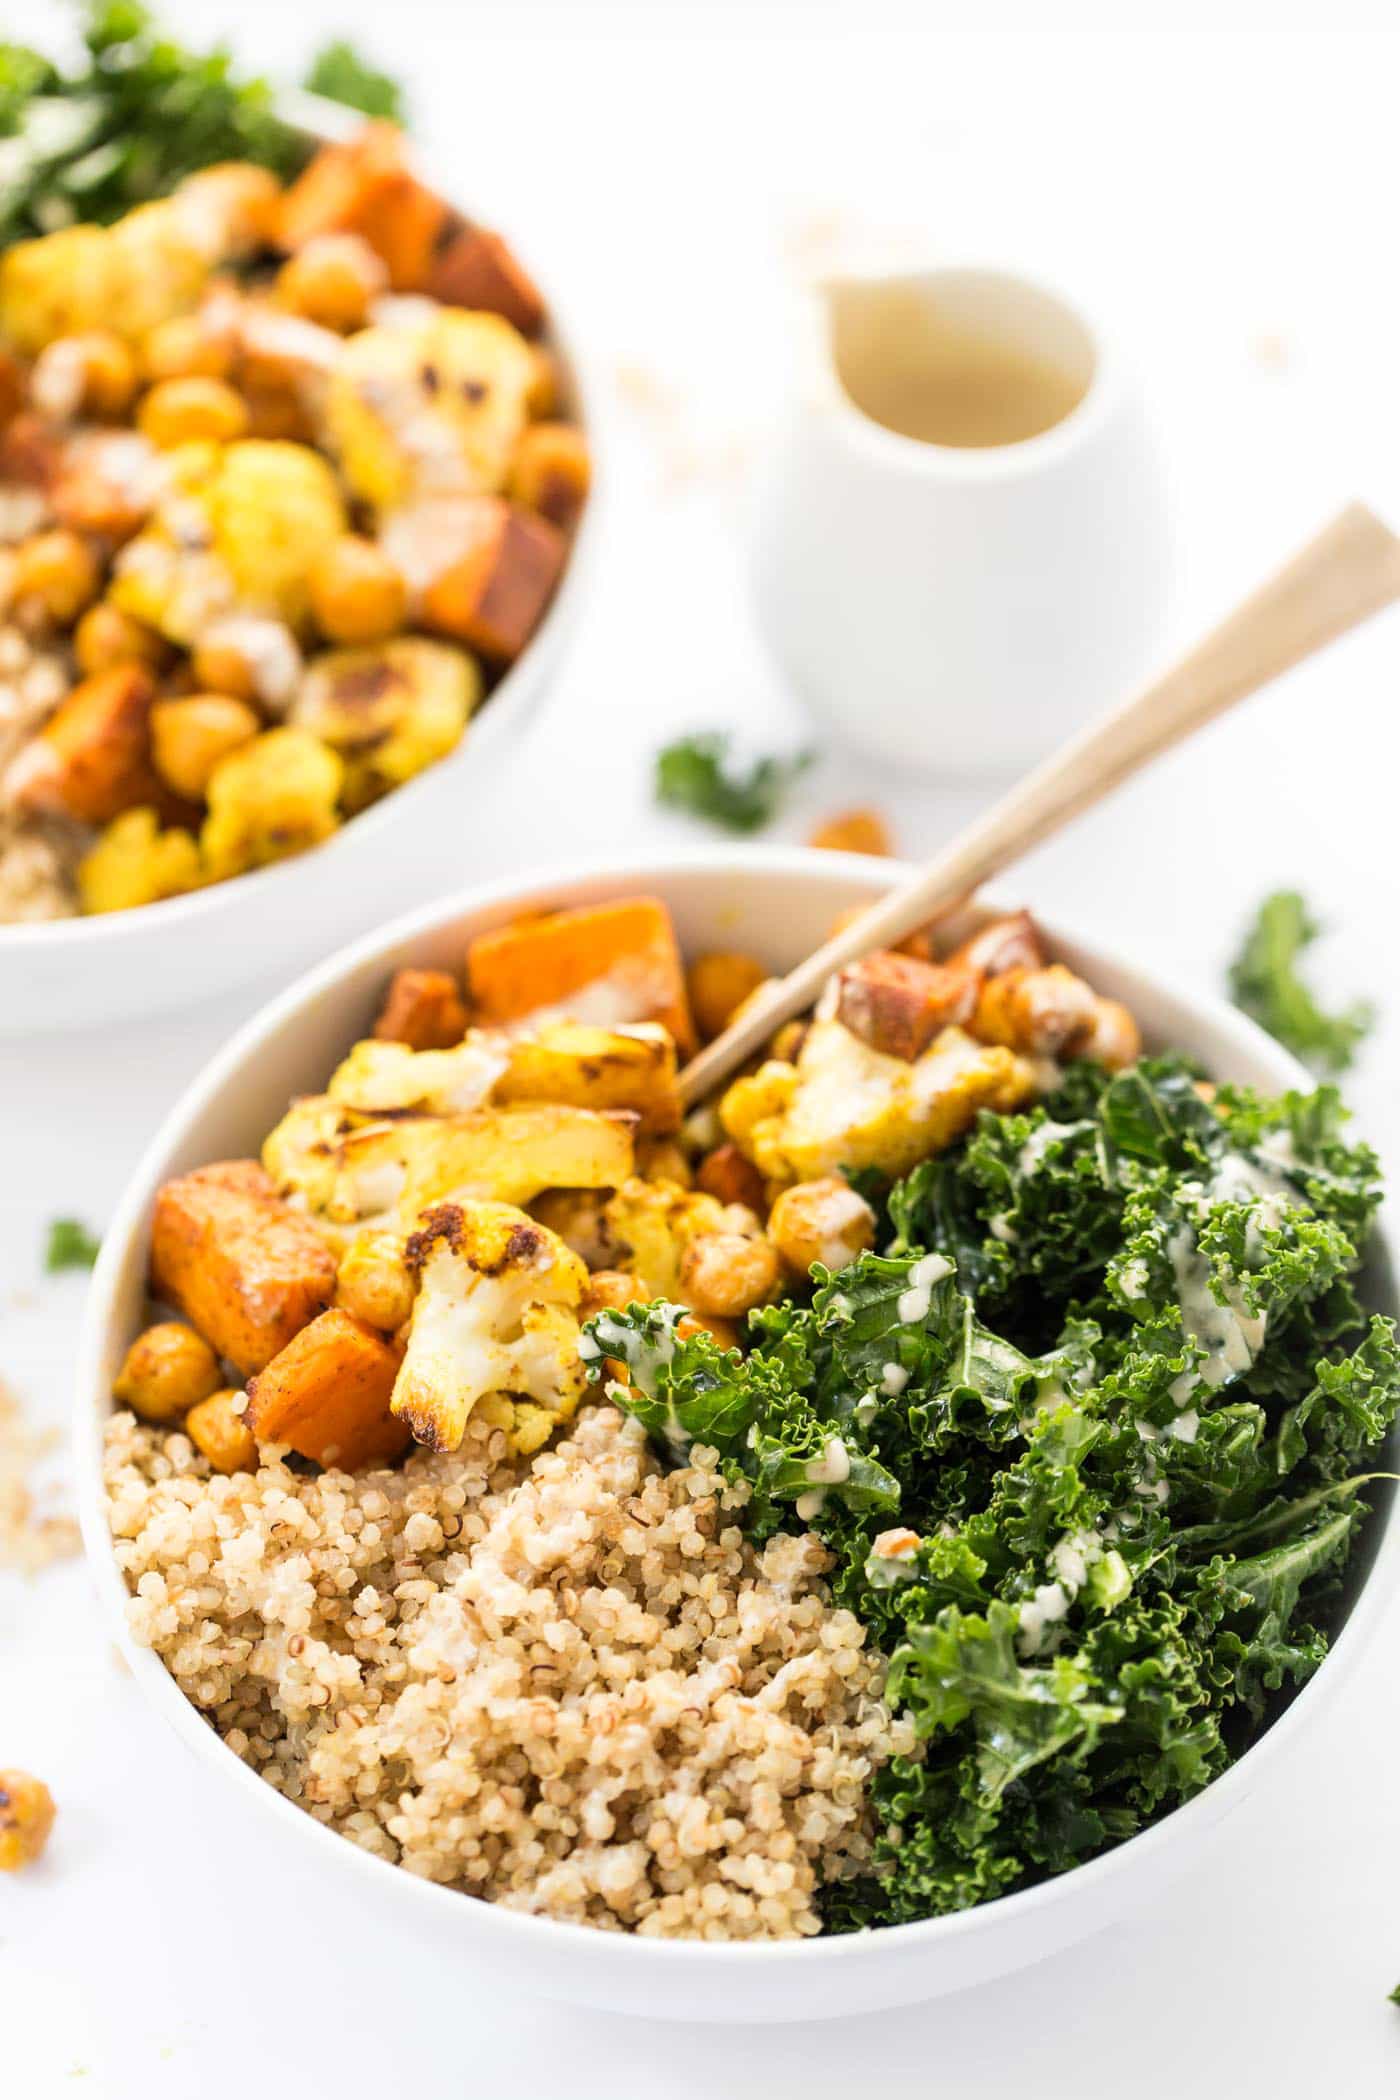 These HEALTHY curry roasted vegetable quinoa bowls are the perfect meal - easy to make, packed with protein and filled with amazing veggies!